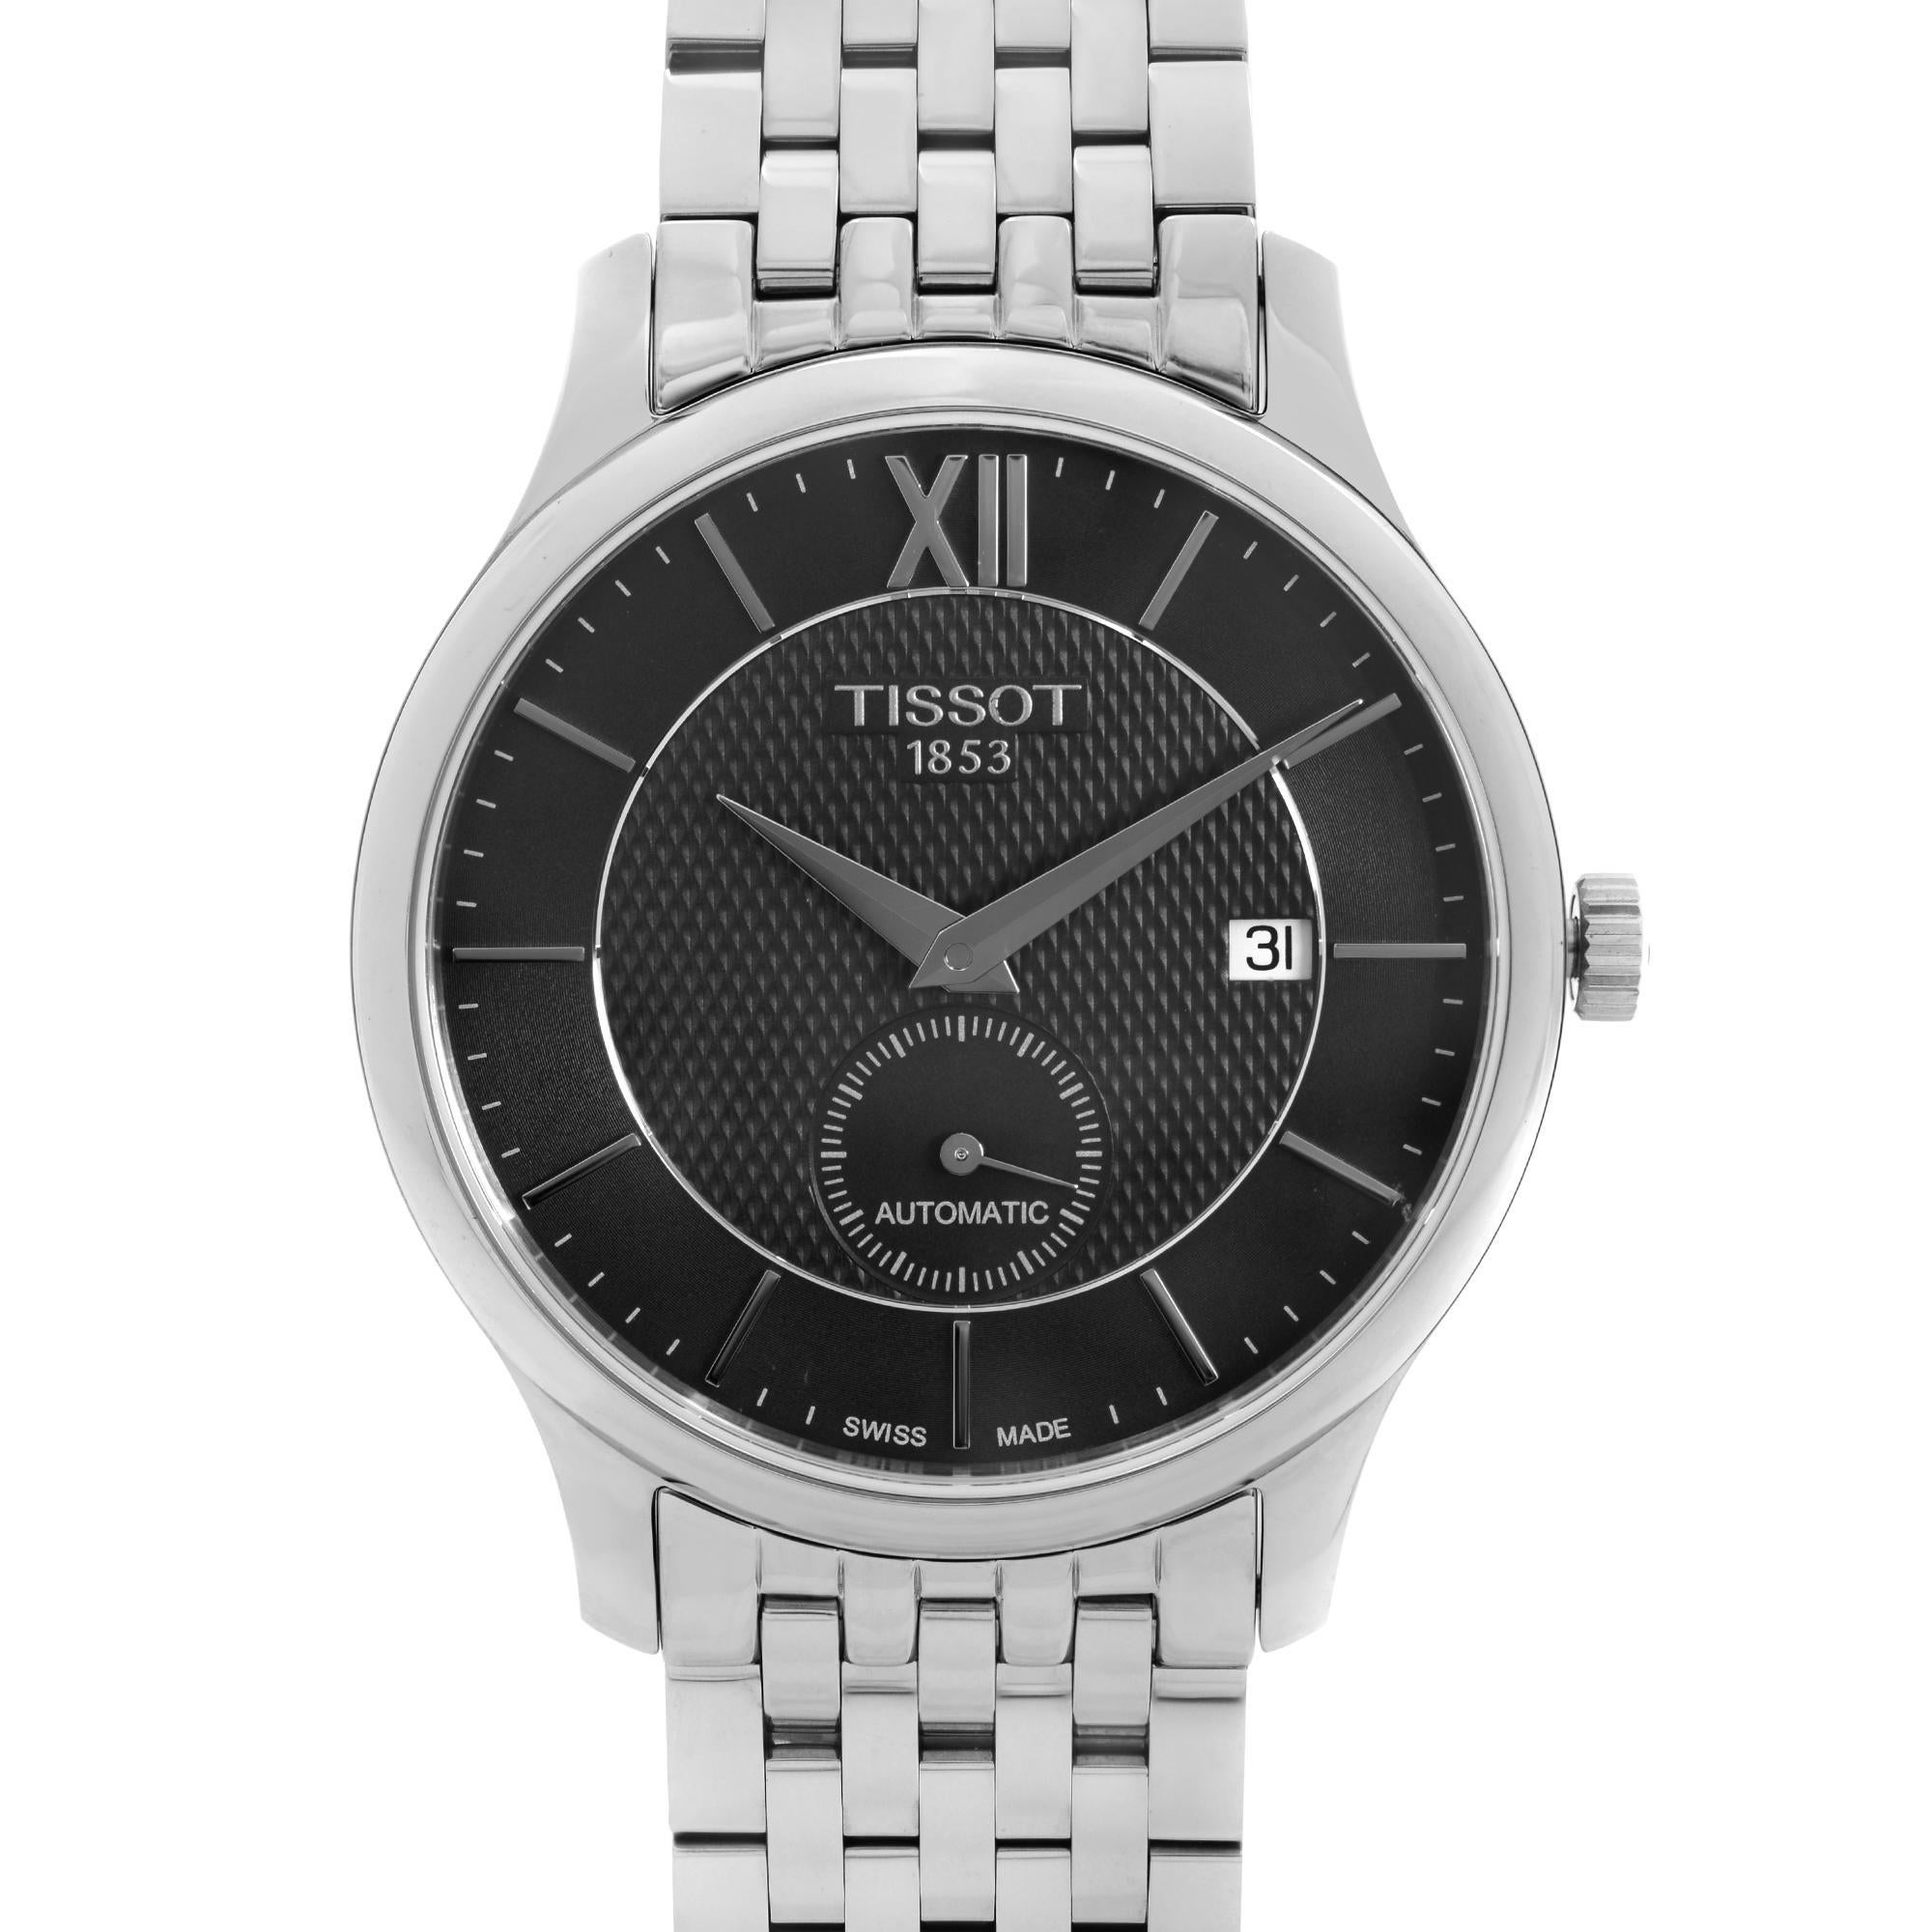 Display Model Tissot Tradition 40mm Stainless Steel Black Dial Mens Automatic Watch T063.428.11.058.00. This Timepiece is Powered by Mechanical (Automatic) Movement and Features: Stainless Steel Case with a Stainless Steel Bracelet, Fixed Stainless